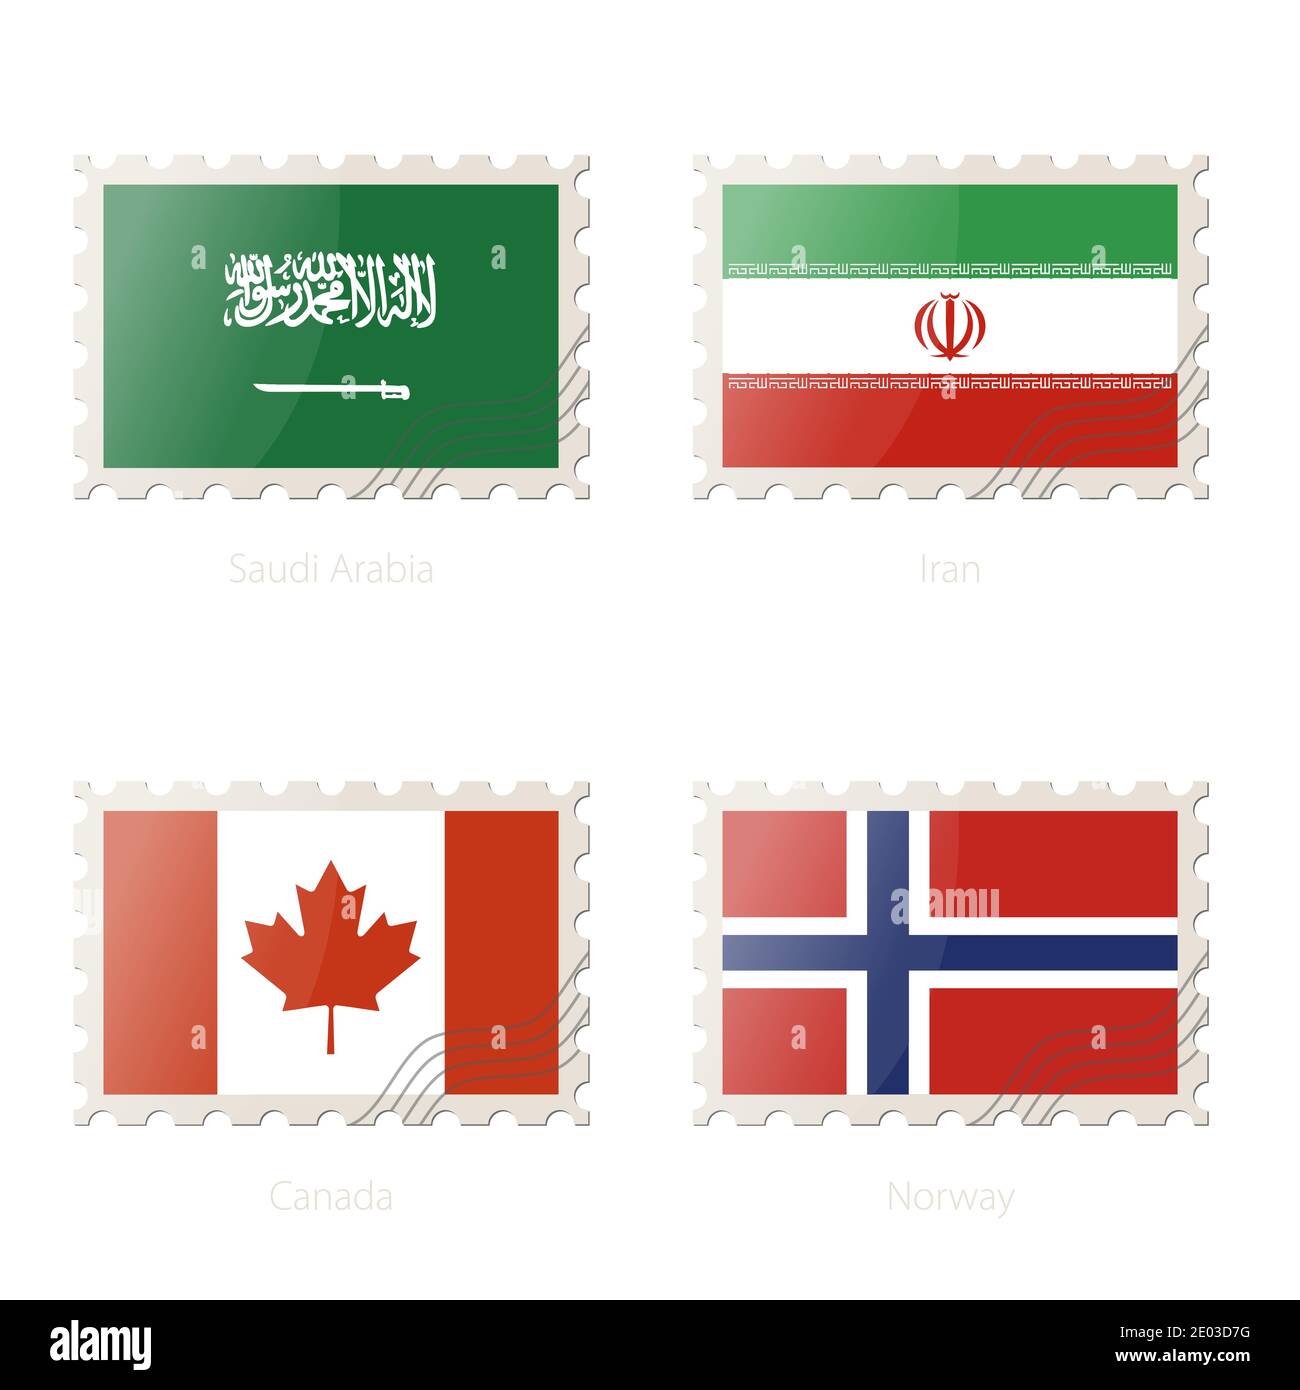 Postage stamp with the image of Saudi Arabia, Iran, Canada, Norway flag. Vector Illustration. Stock Vector